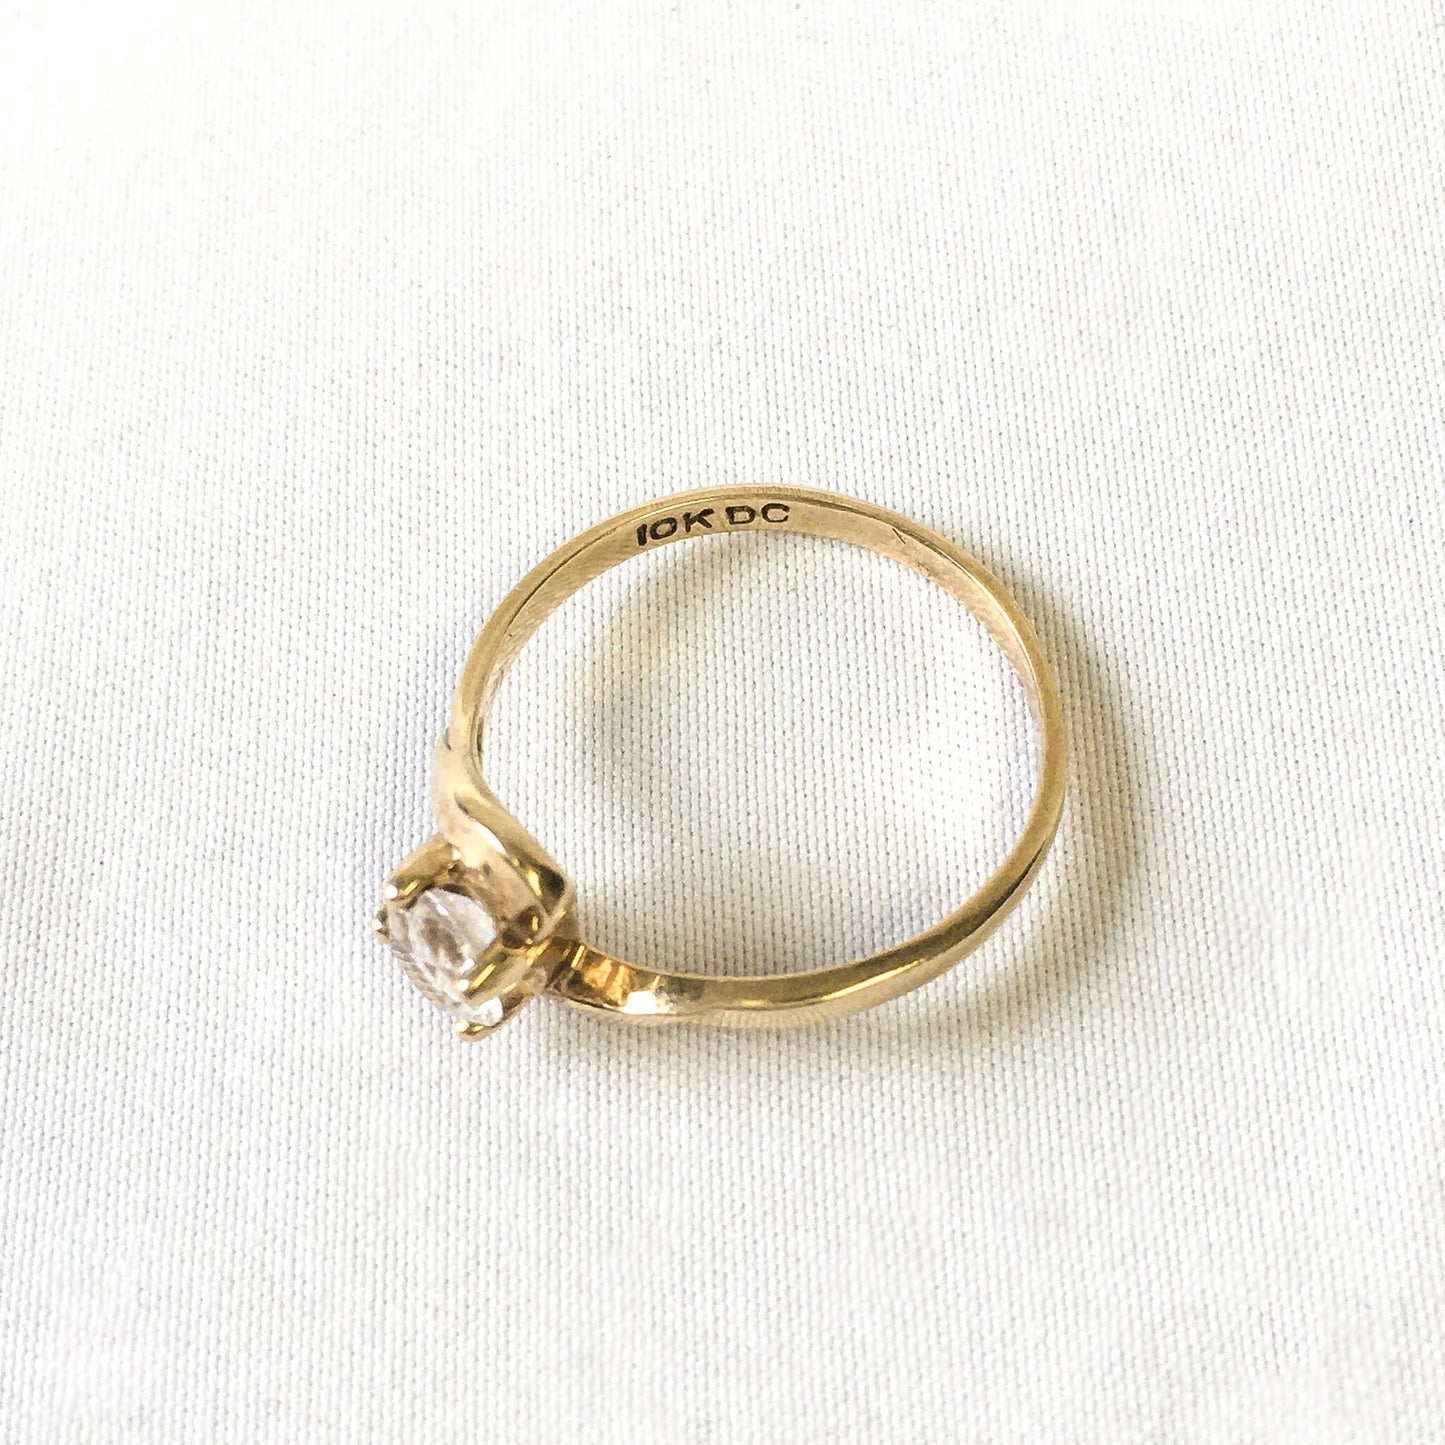 Vintage 10k DC Quartz Solitaire Wedding or Engagement Ring, Beautiful Gold Ring, Size 6.75